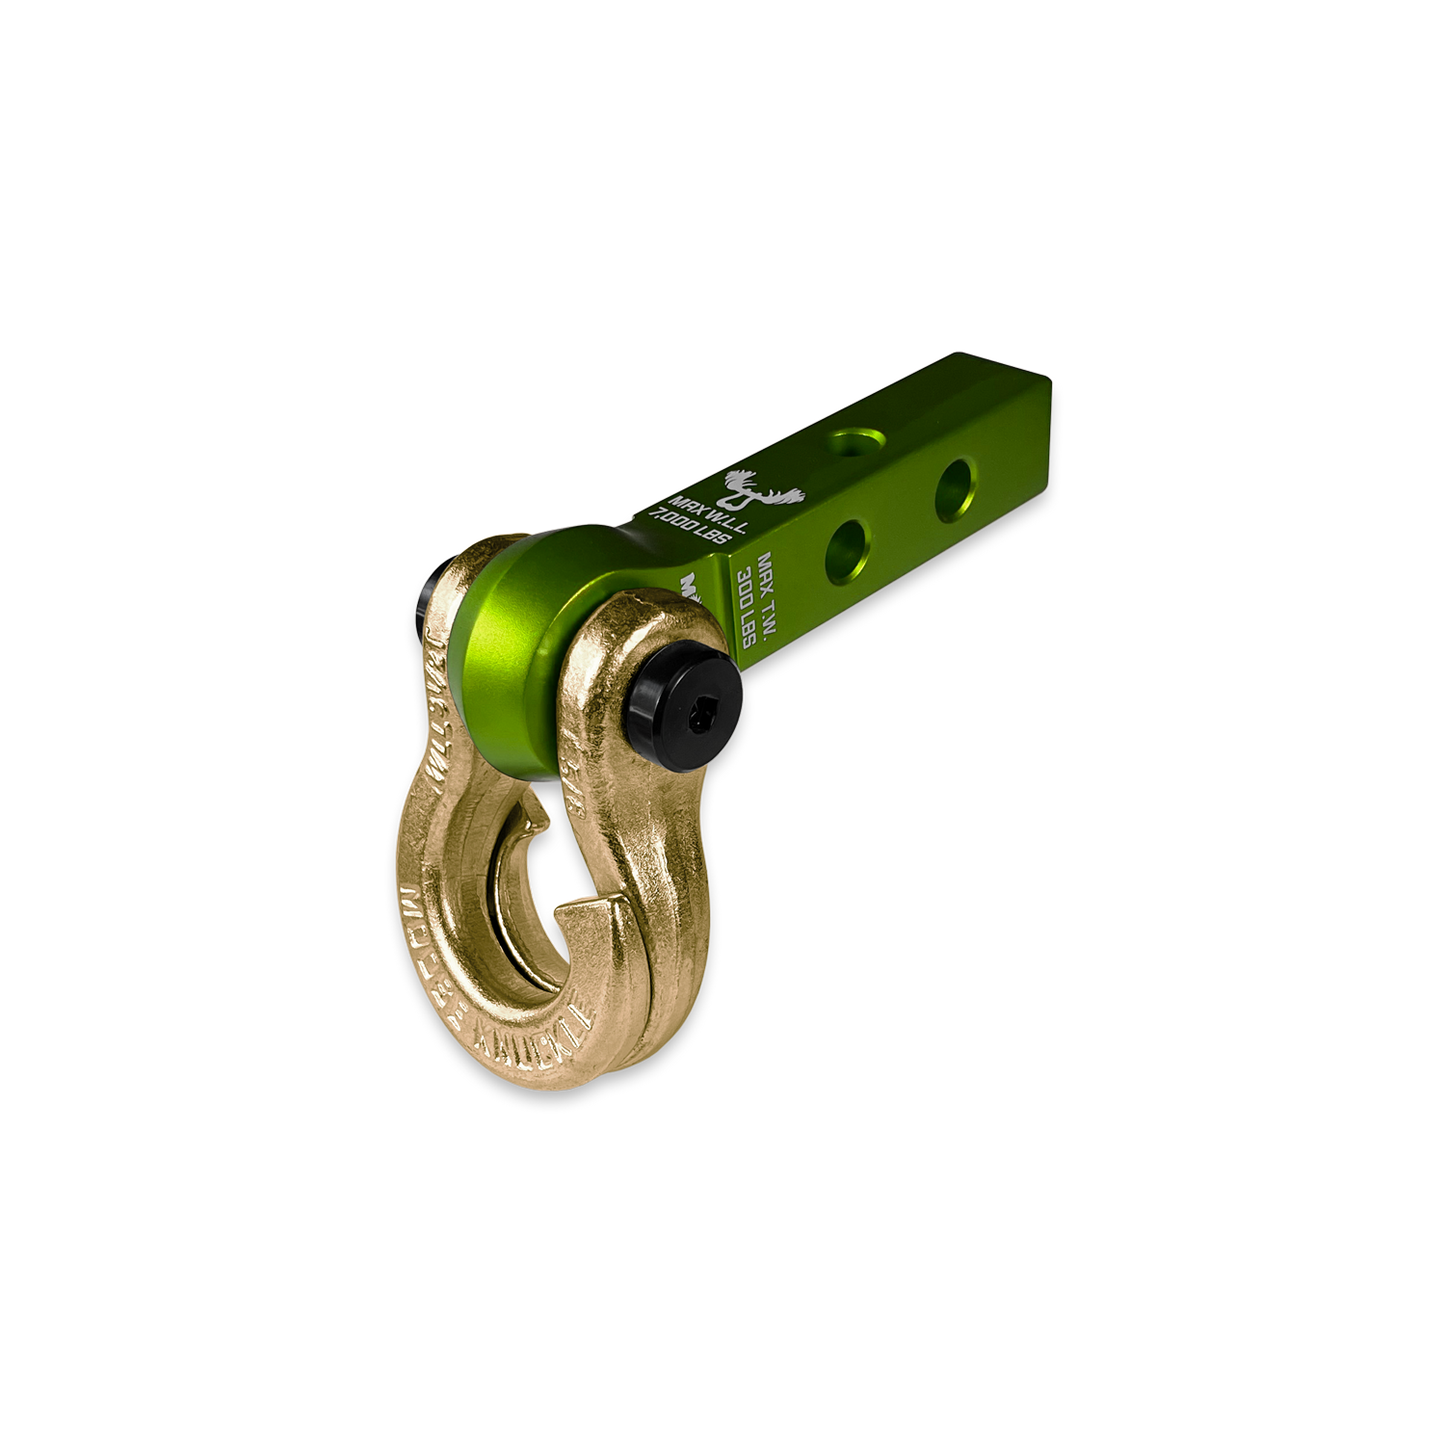 Jowl 5/8 Split Shackle & 1.25 Receiver (Bean Green and Brass Knuckle)